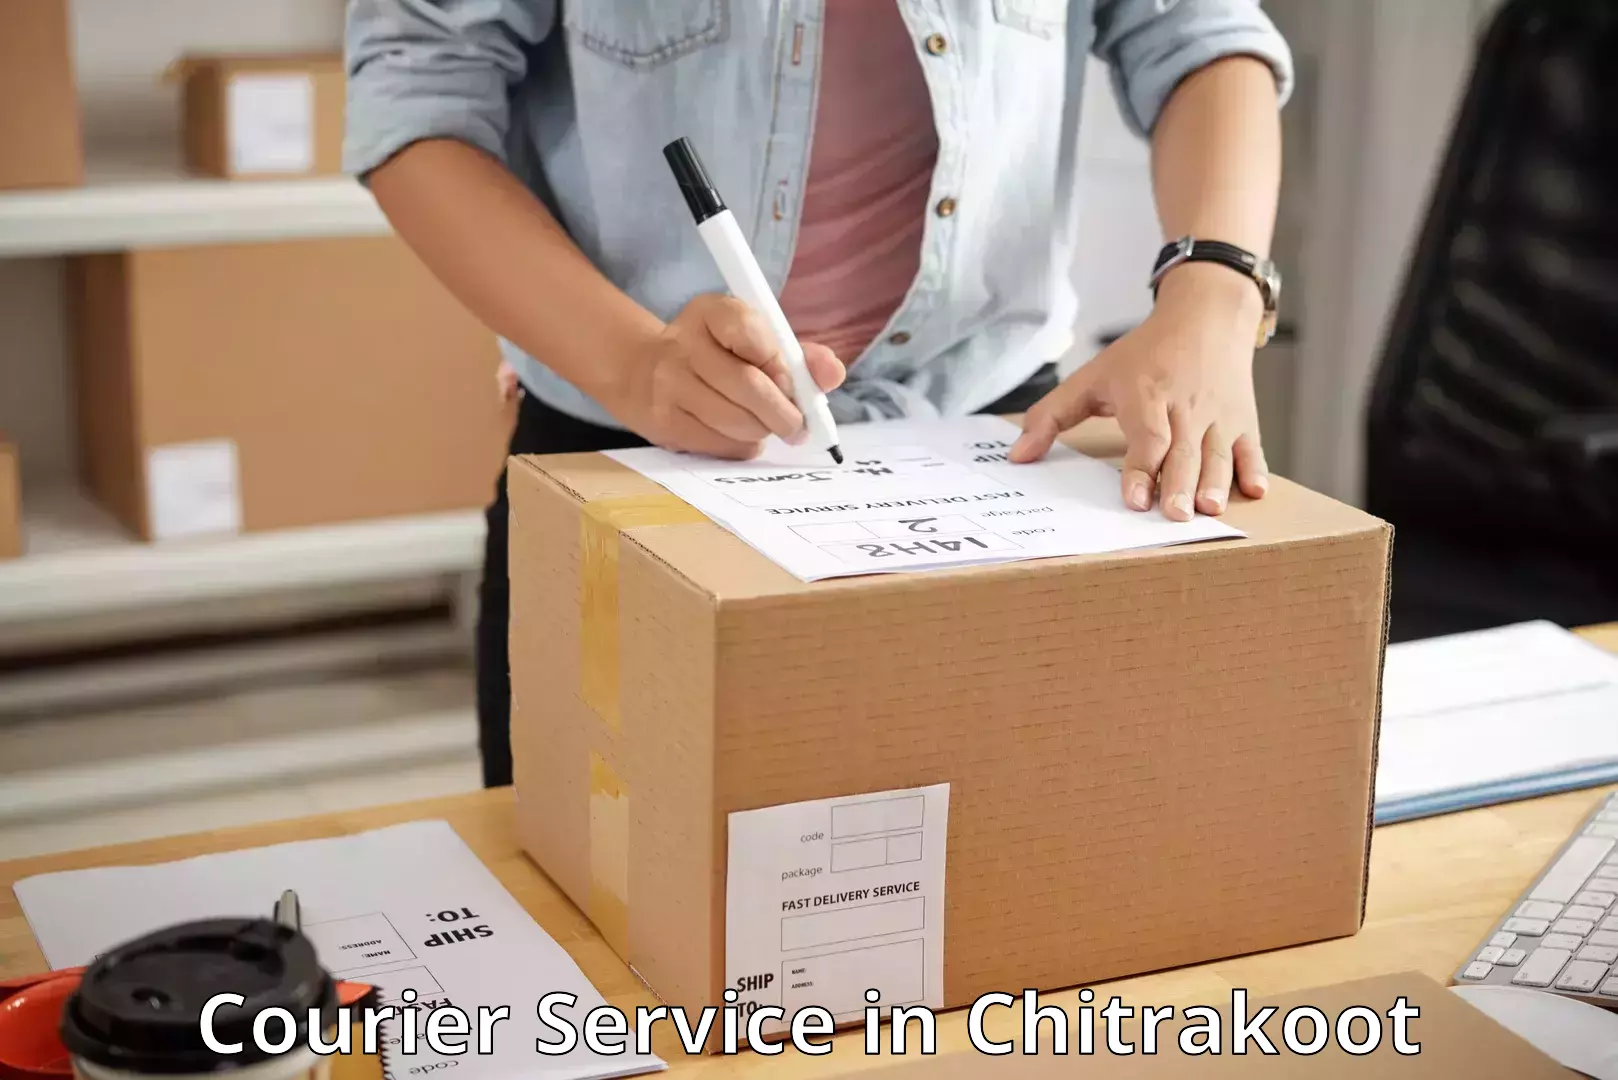 Emergency parcel delivery in Chitrakoot